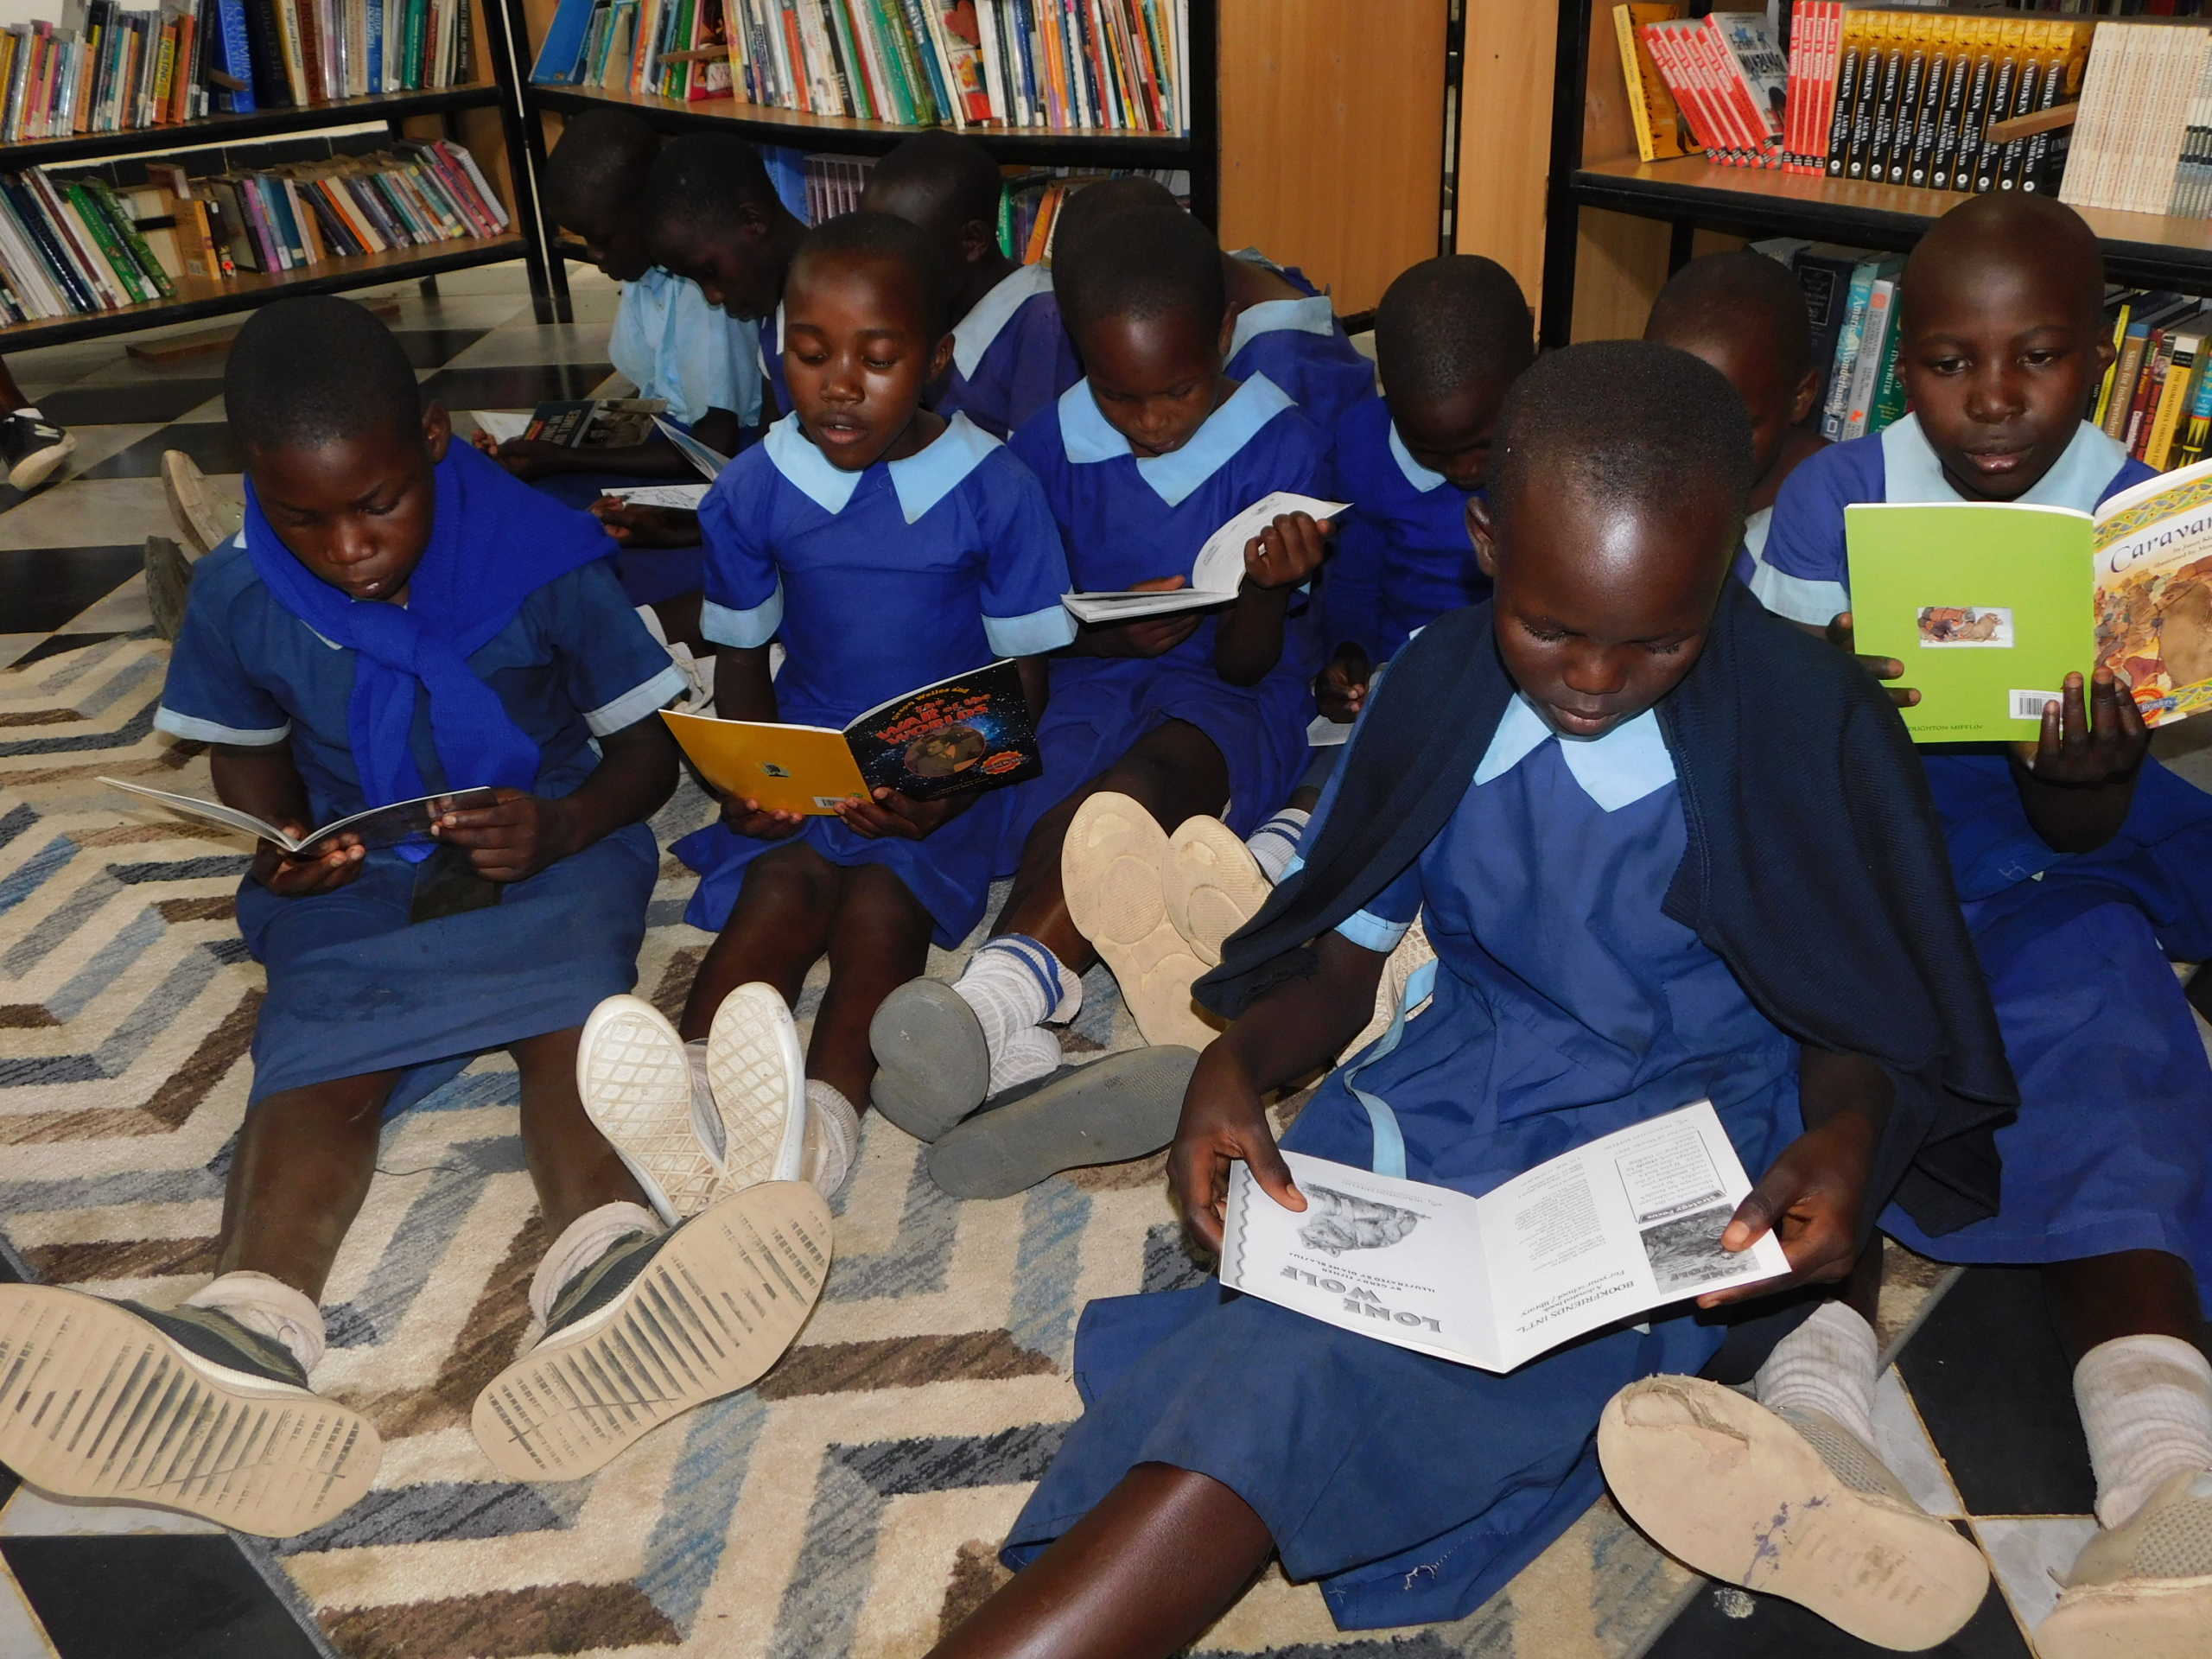 Local children reading in the Children's Library at JAMS